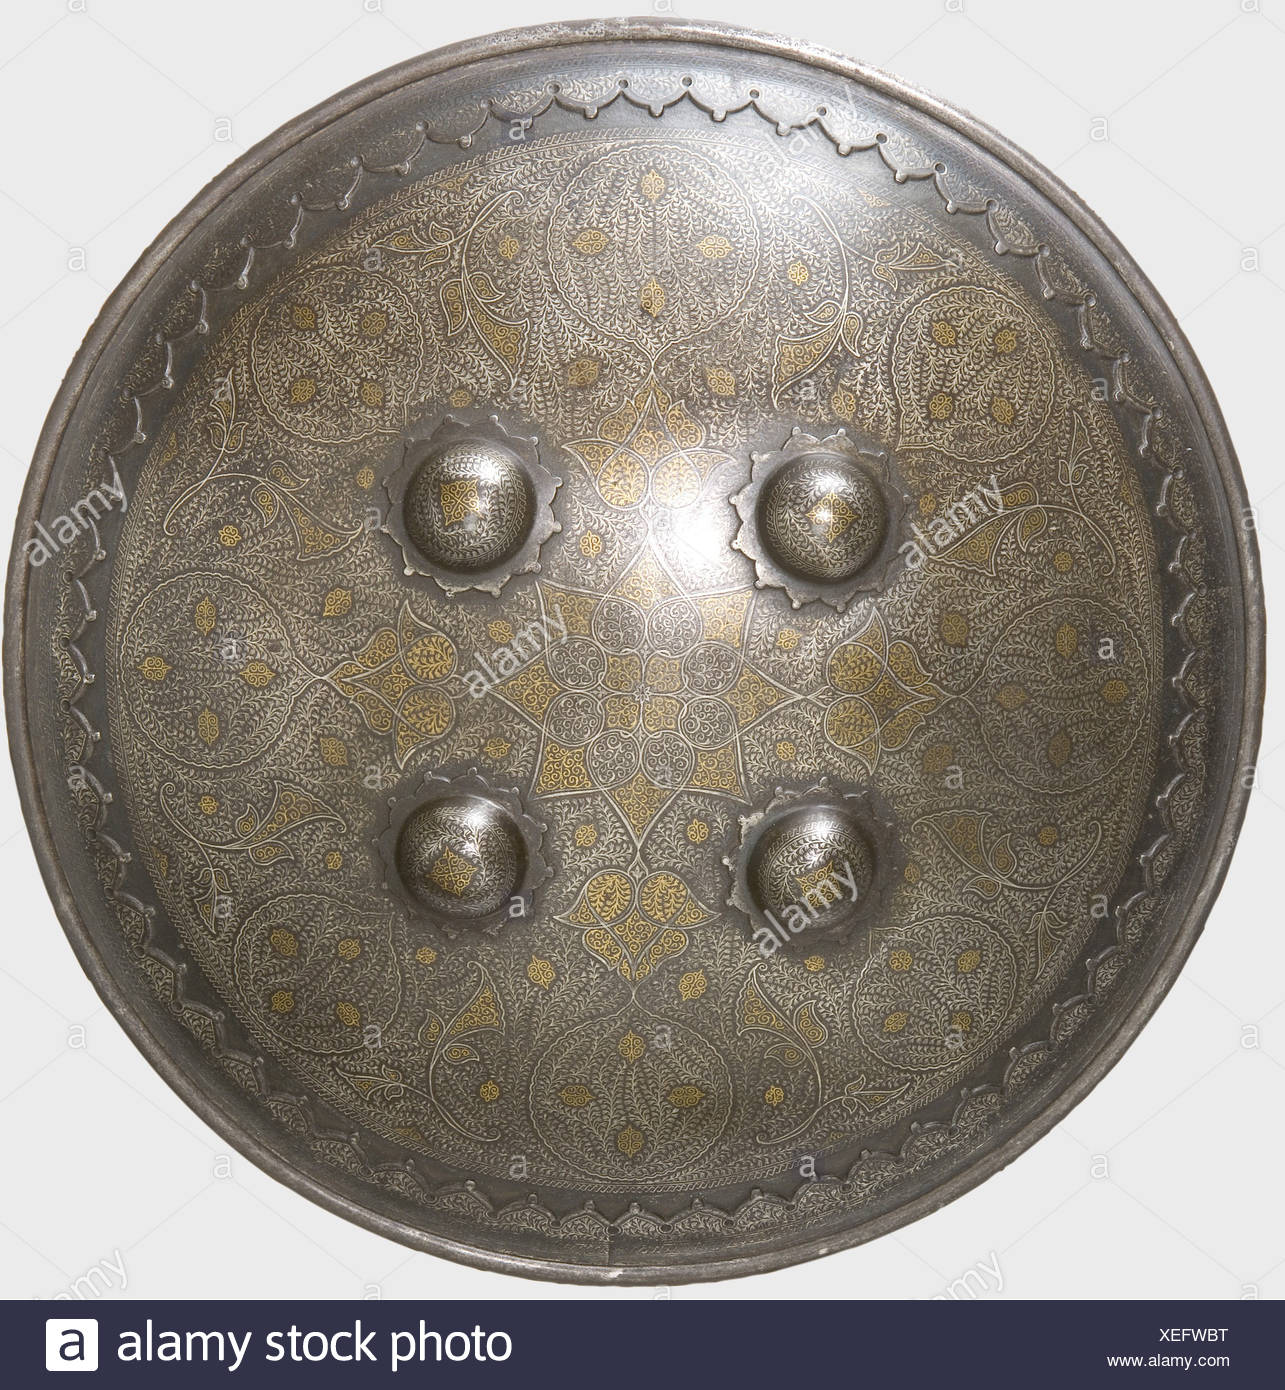 an-indian-shield-lahore-19th-century-a-cambered-shield-with-fine-gold-and-silver-filled-floral-decoration-reinforced-rim-fou-XEFWBT.jpg